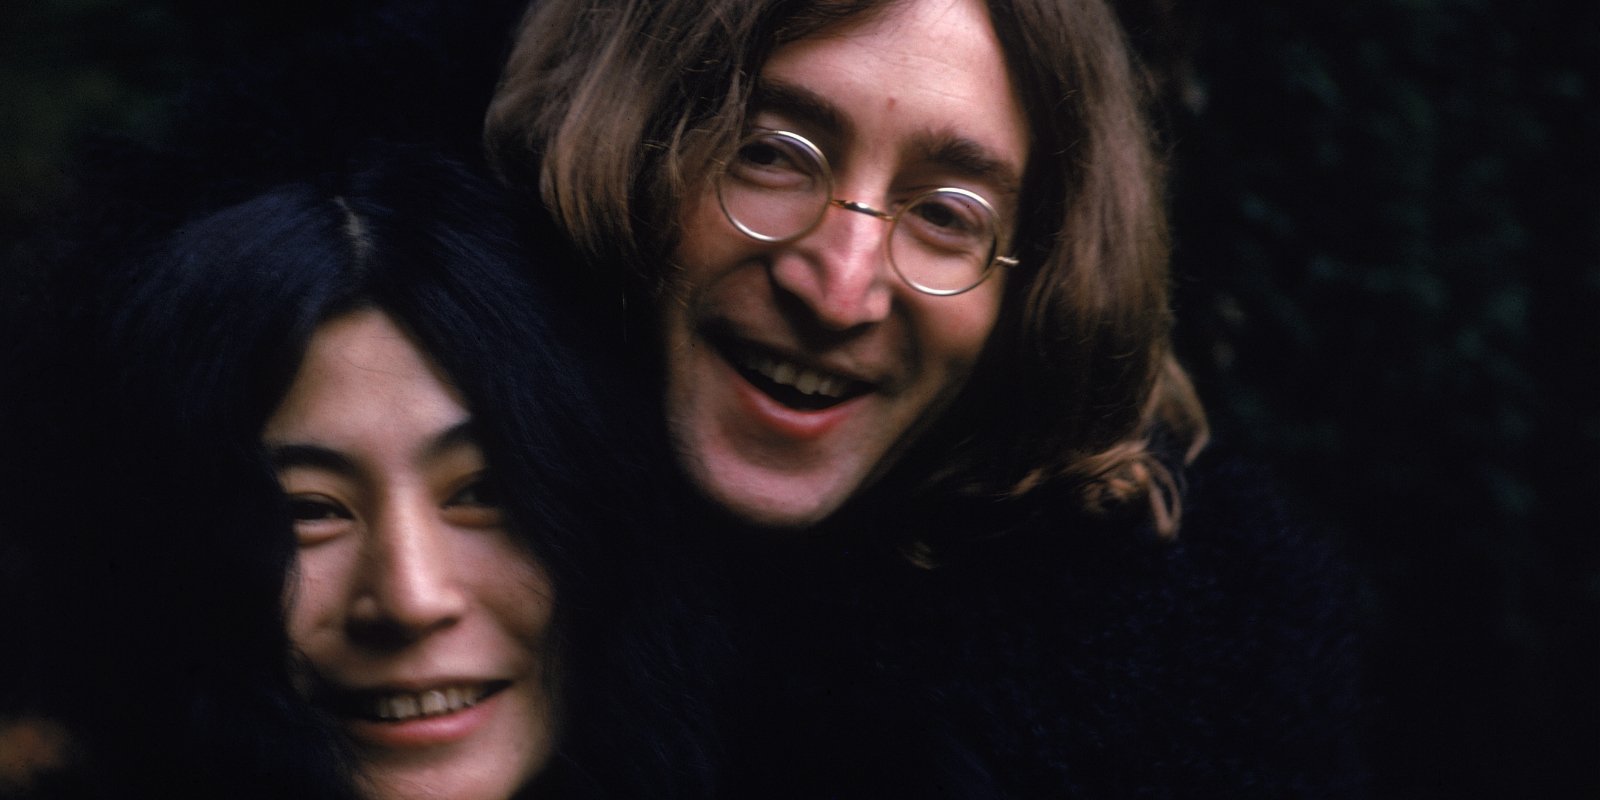 Yoko Ono and John Lennon laughing together in a photograph.